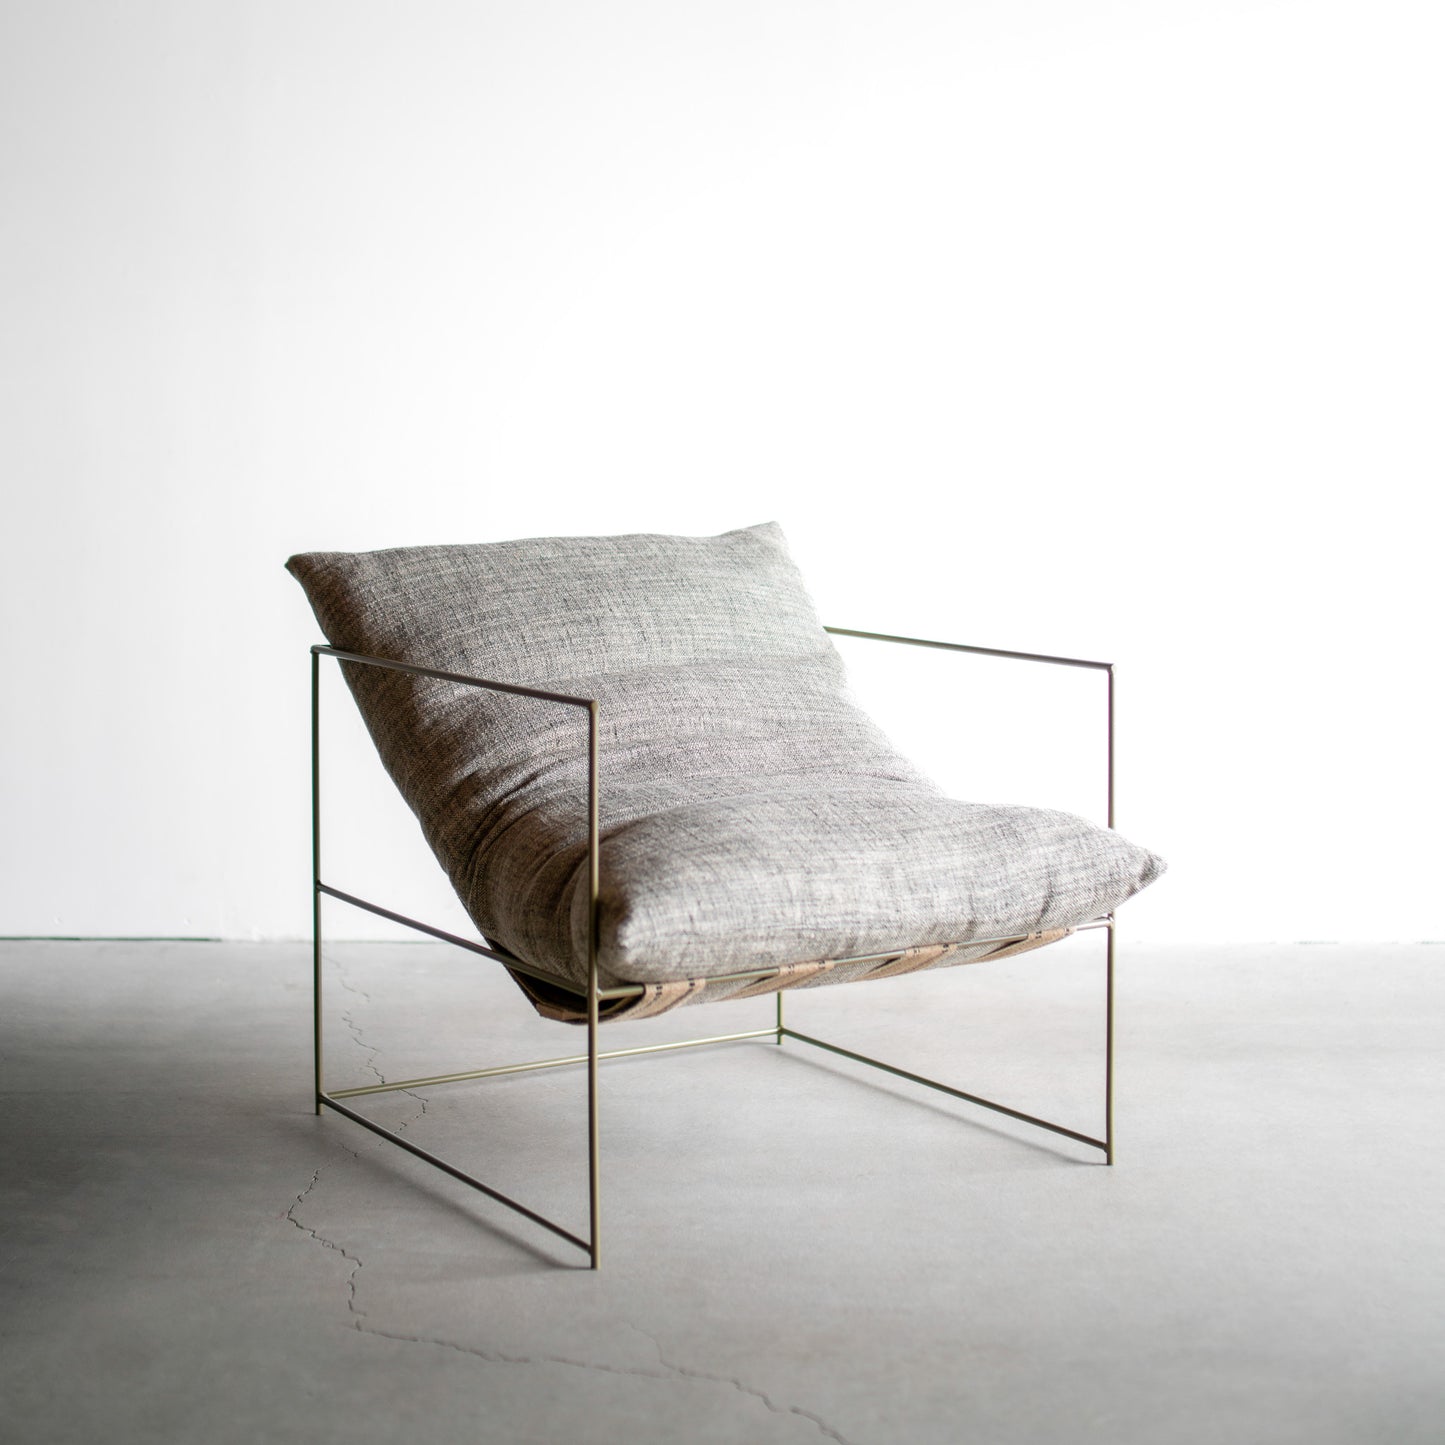 Sierra chair x brooke wagner - Steel frame with woven fabric